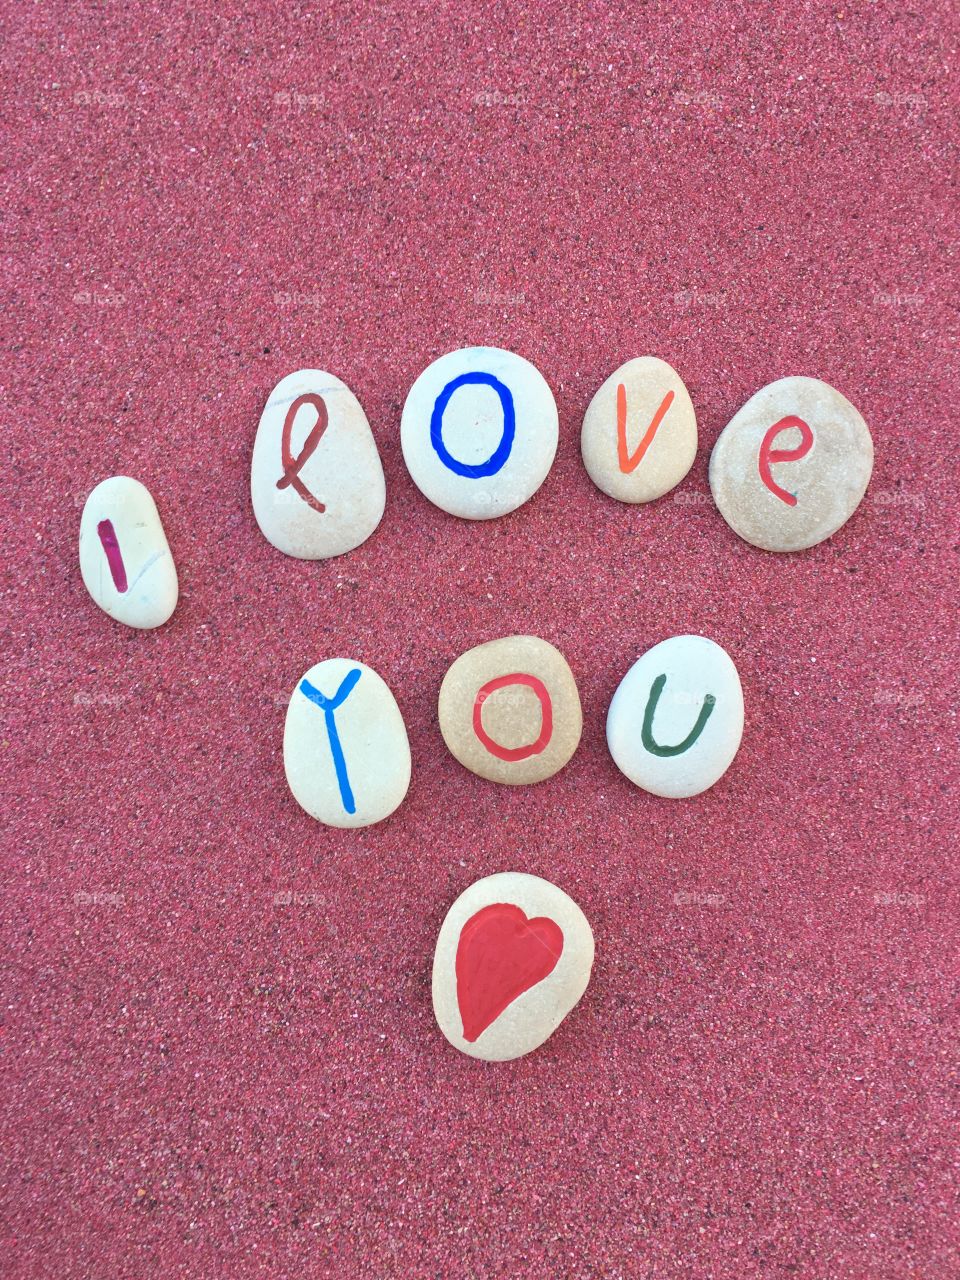 I love you message with stone letters on red sand